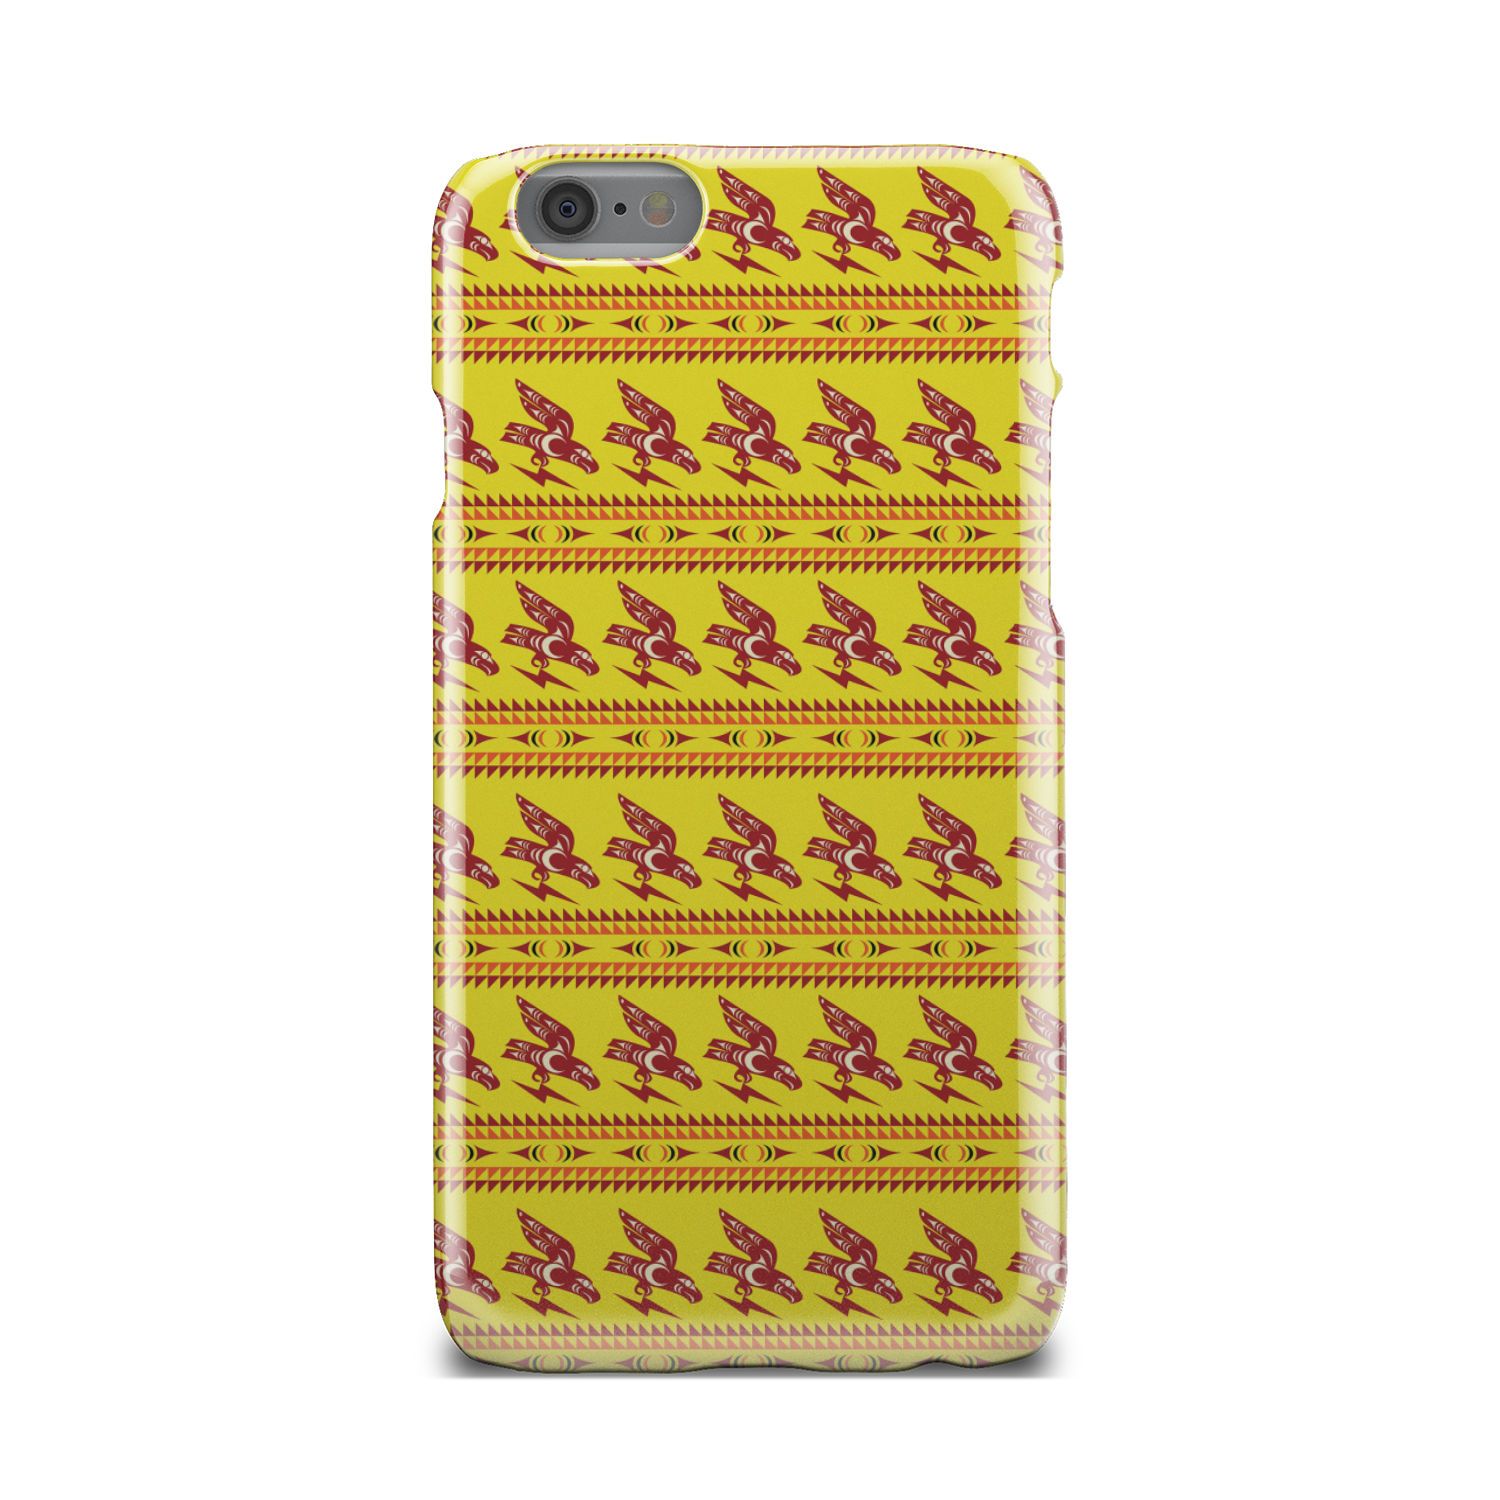 Ovila Mailhot Design : Eagle Brings Good Vibes Yellow Phone Case Phone Case wc-fulfillment iPhone 6s 